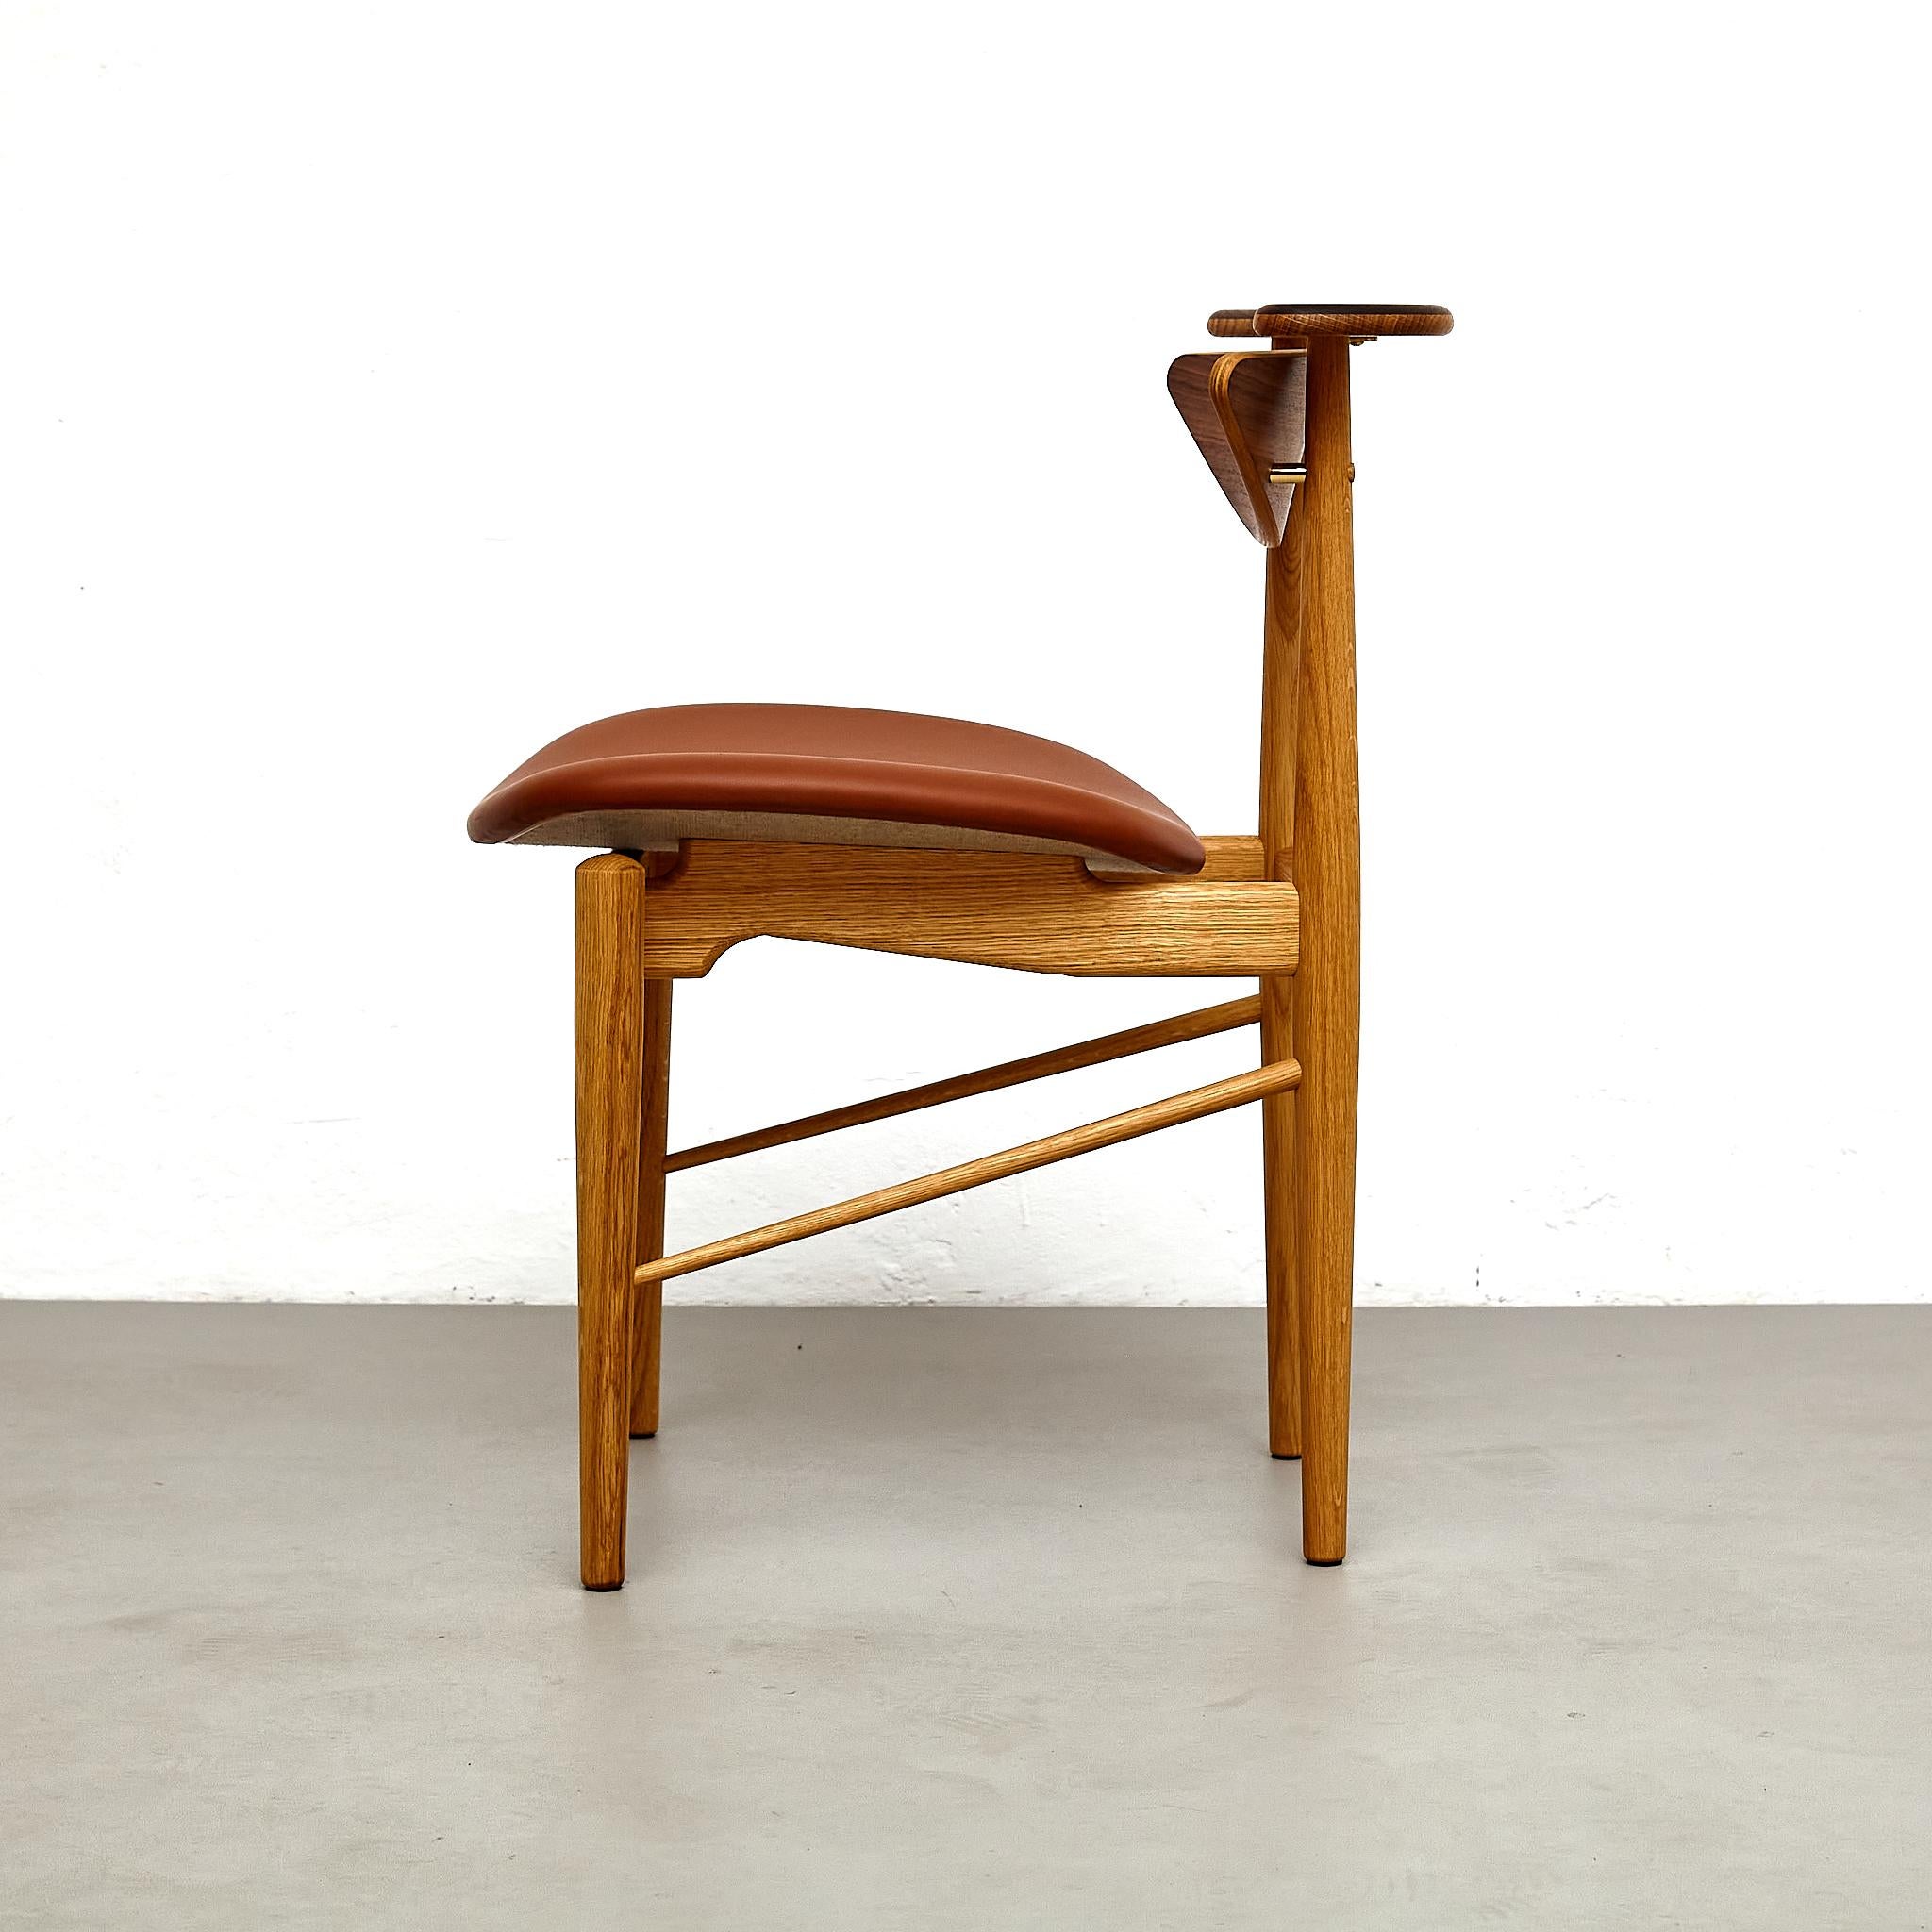 Finn Juhl Reading Chair, Wood and Leather In New Condition For Sale In Barcelona, Barcelona